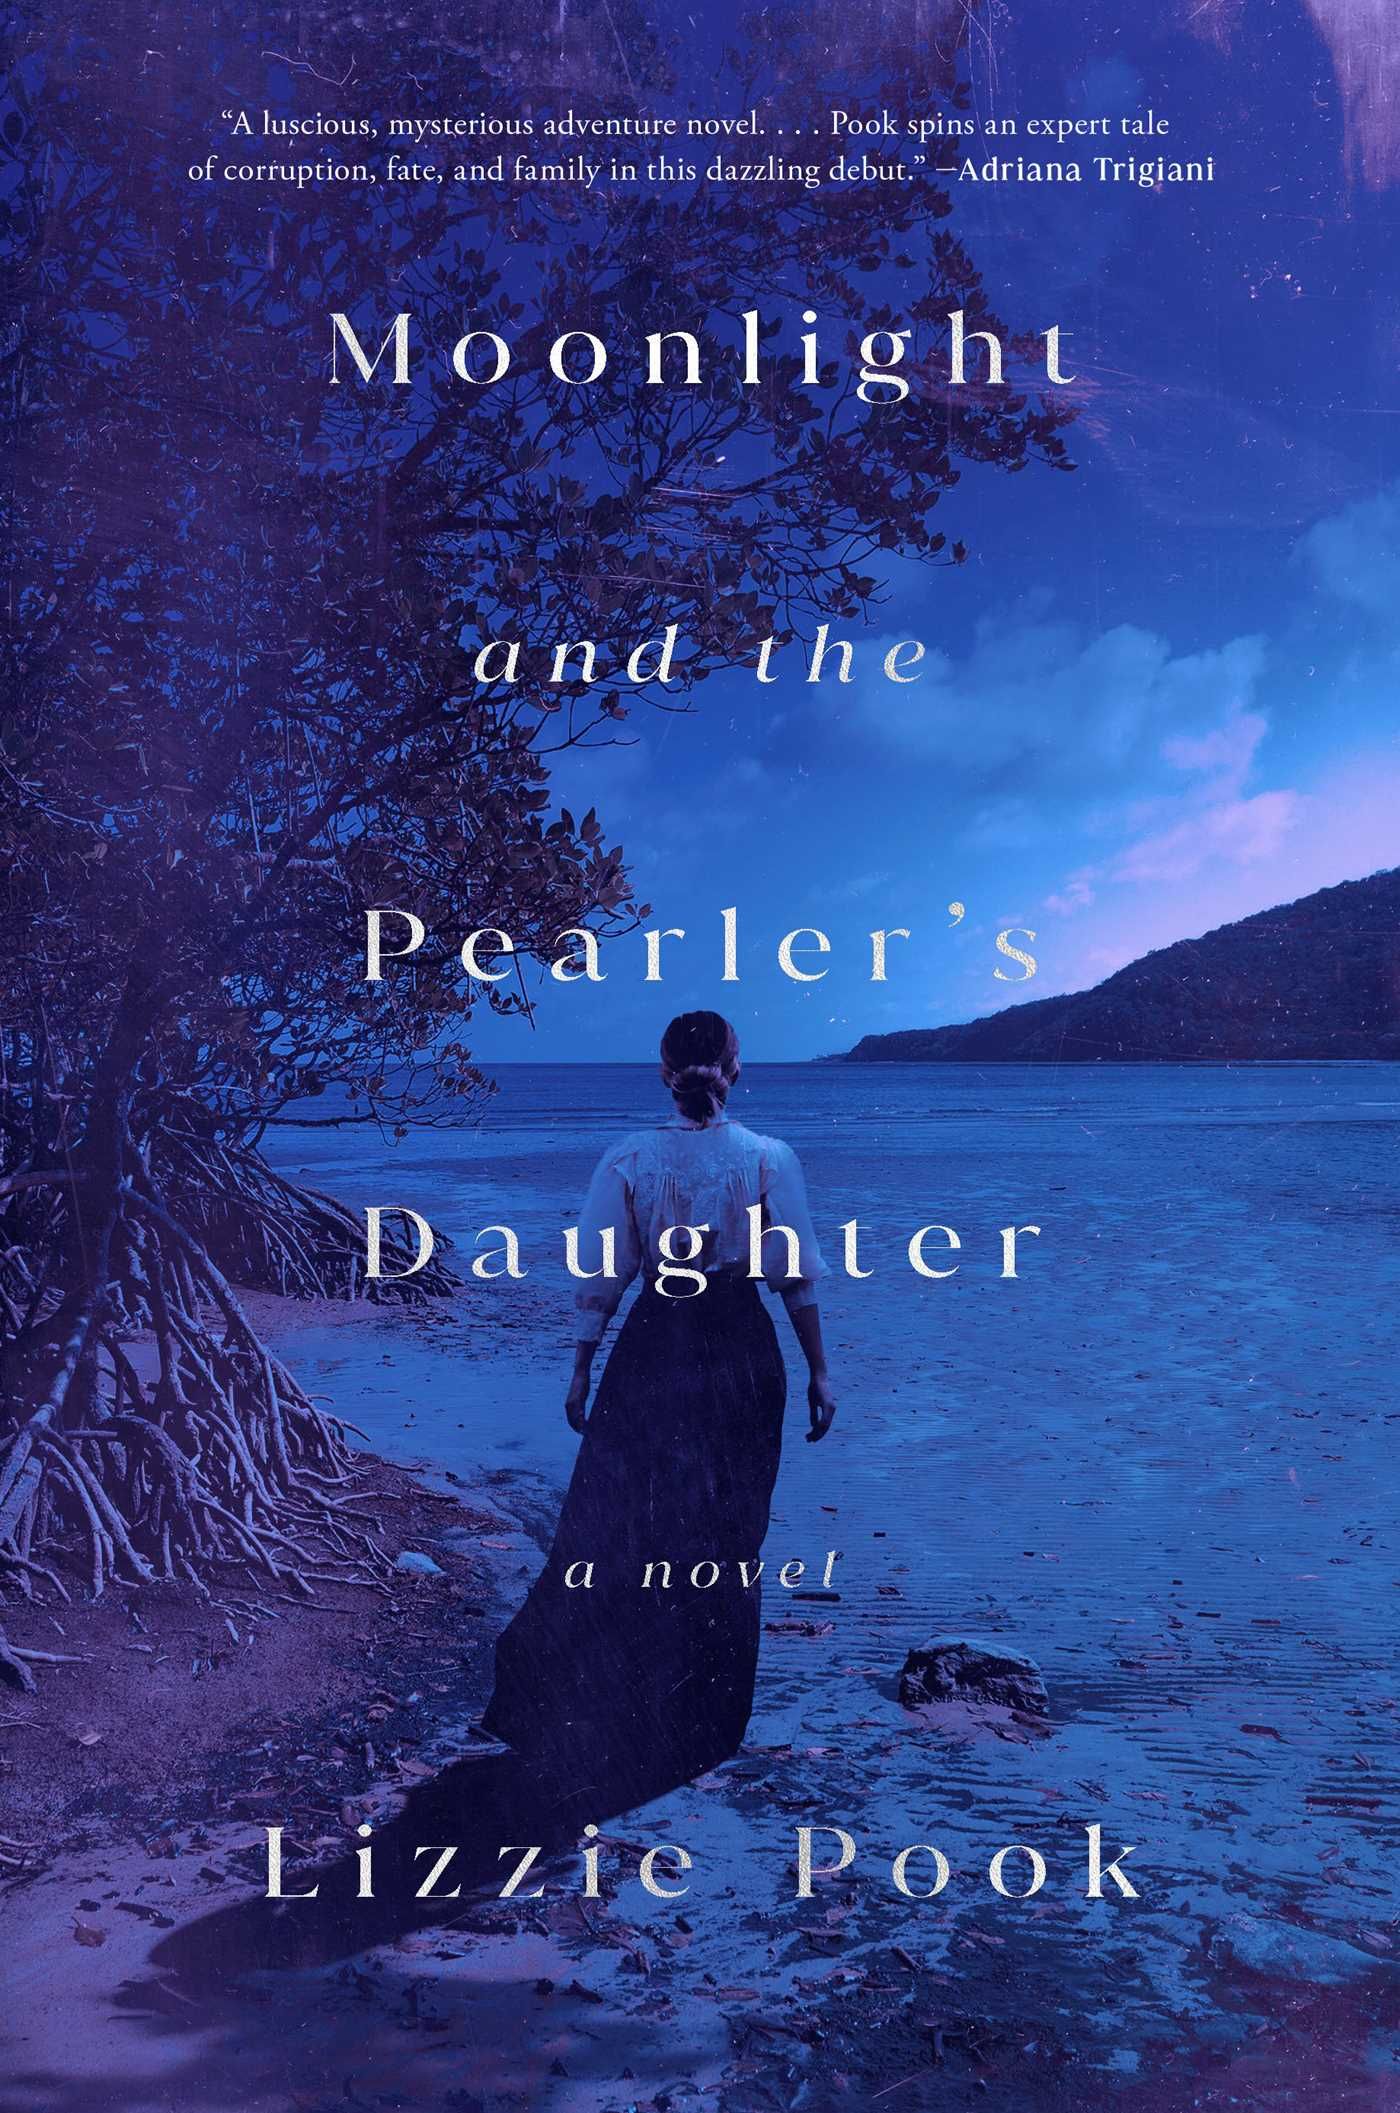 Moonlight and the Pearler's Daughter book cover